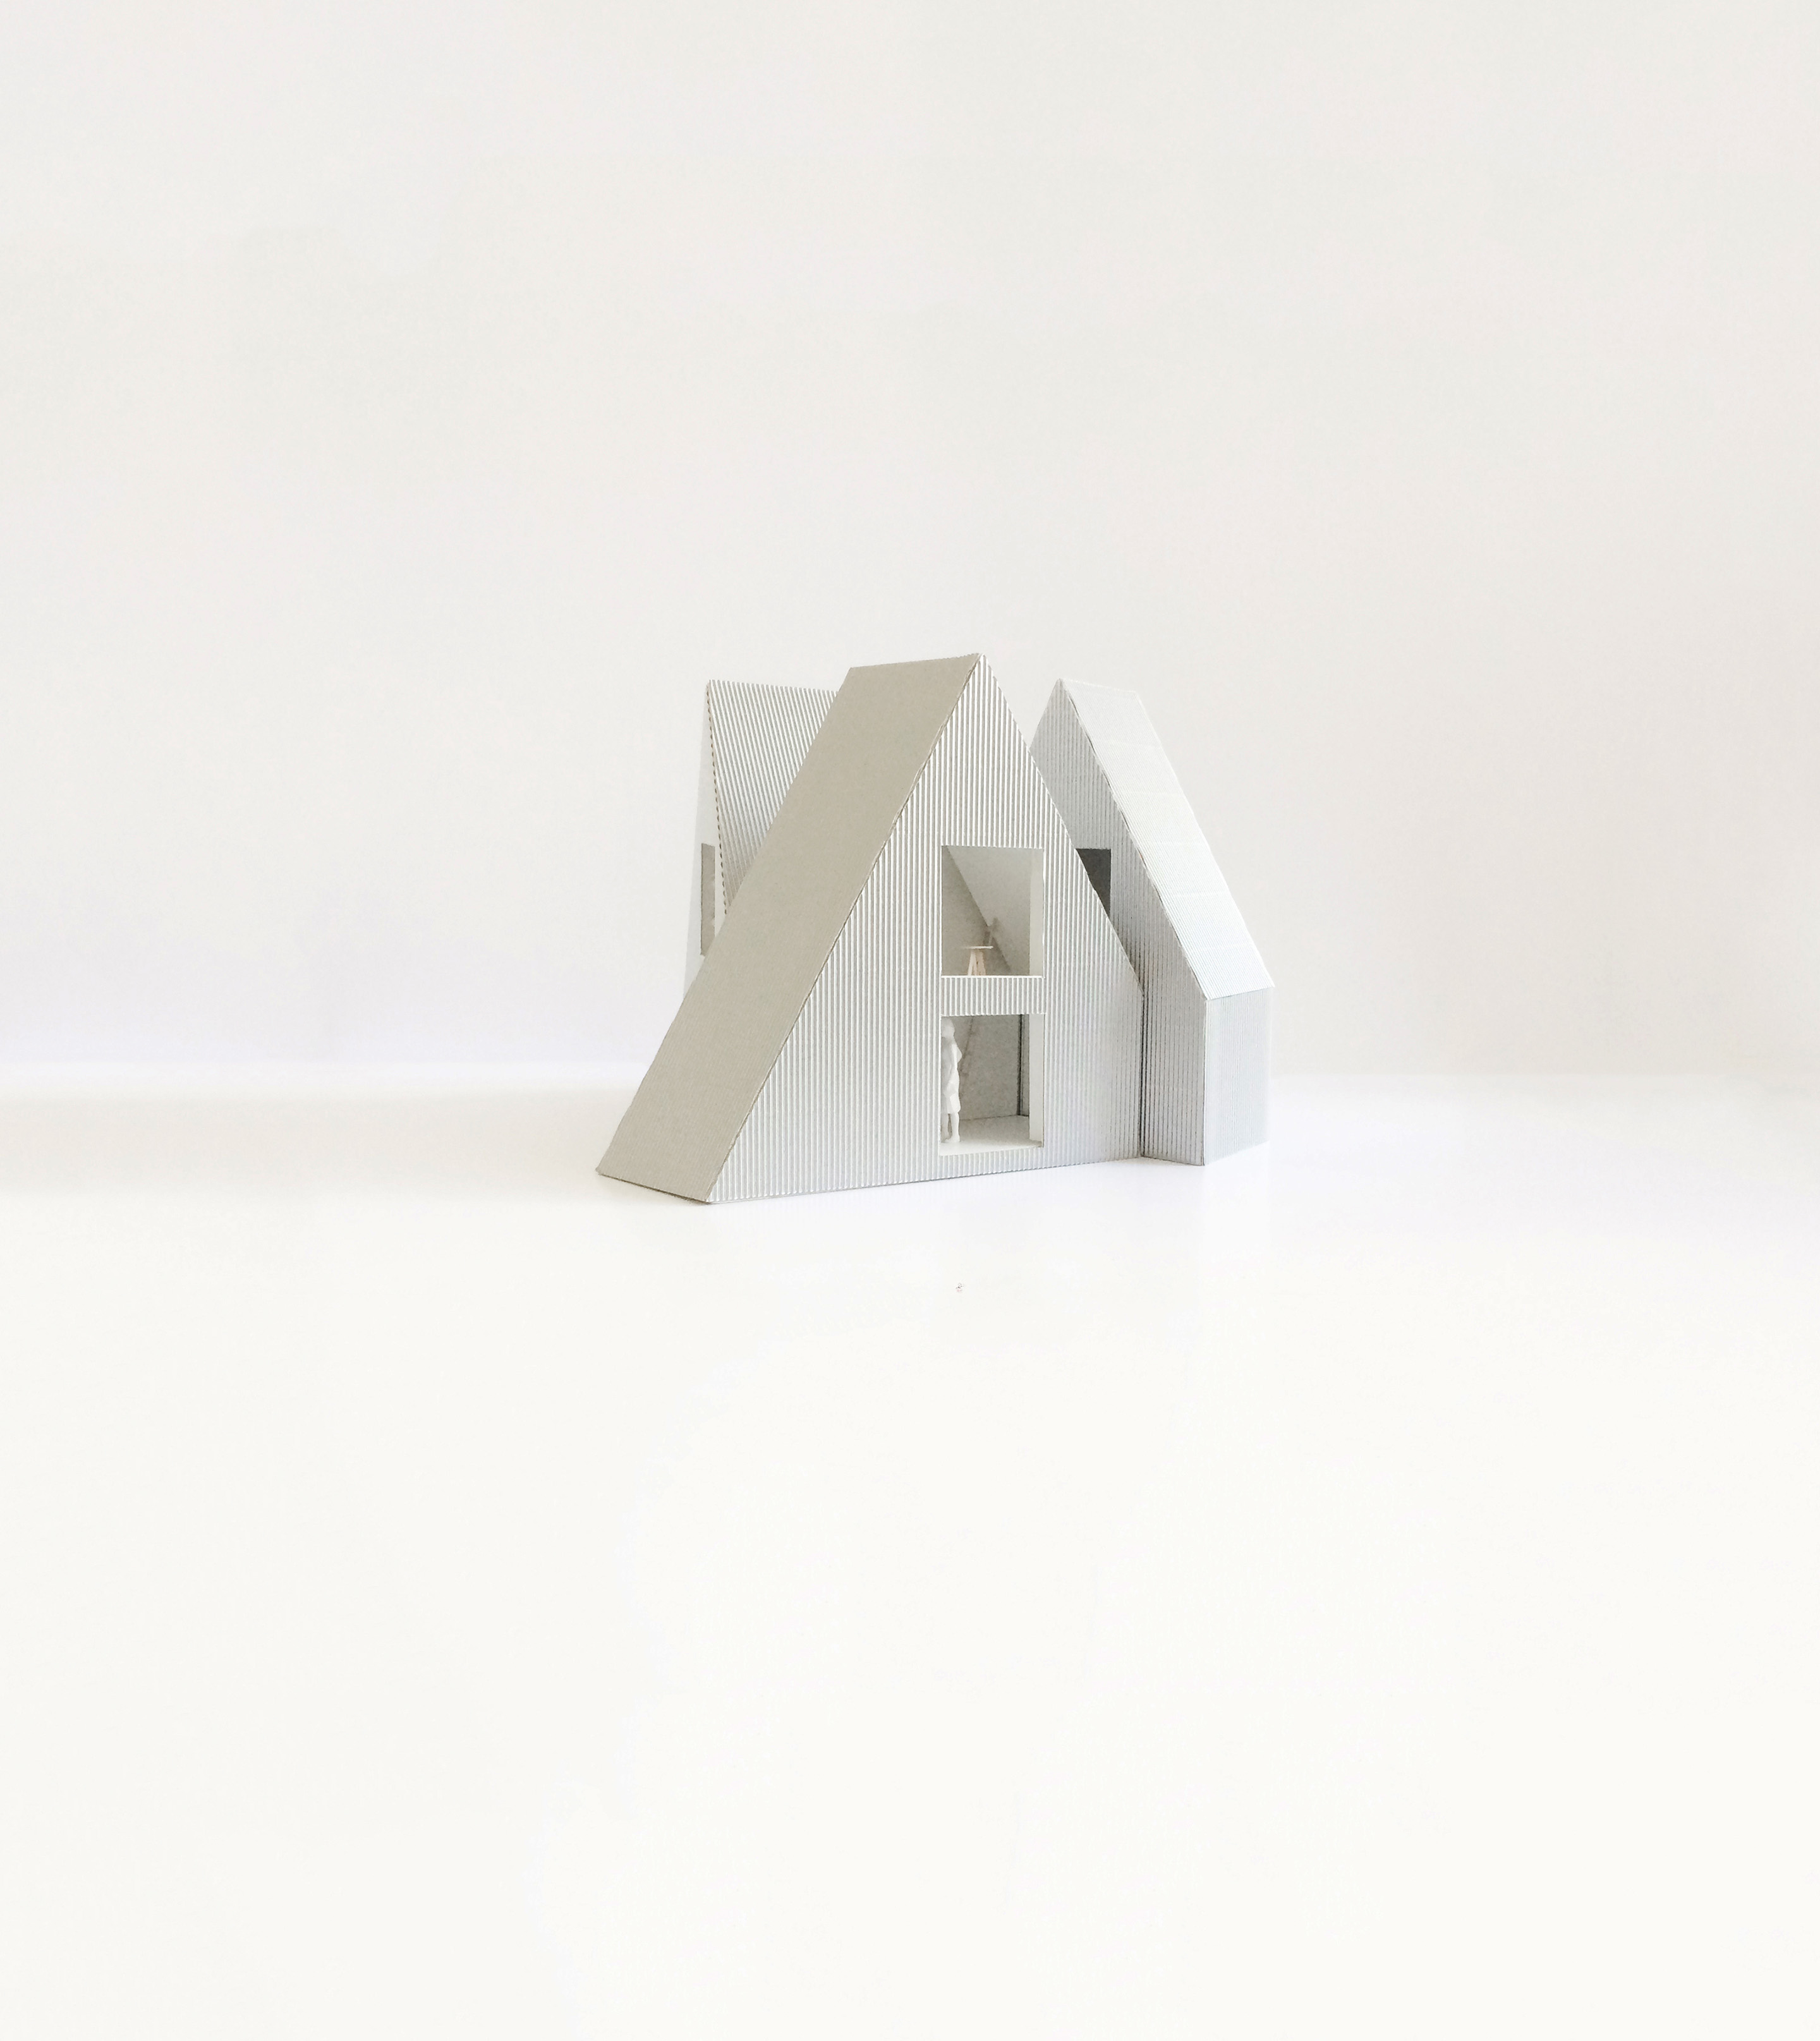 Cabins (model photograph), 2016, Project Proposal